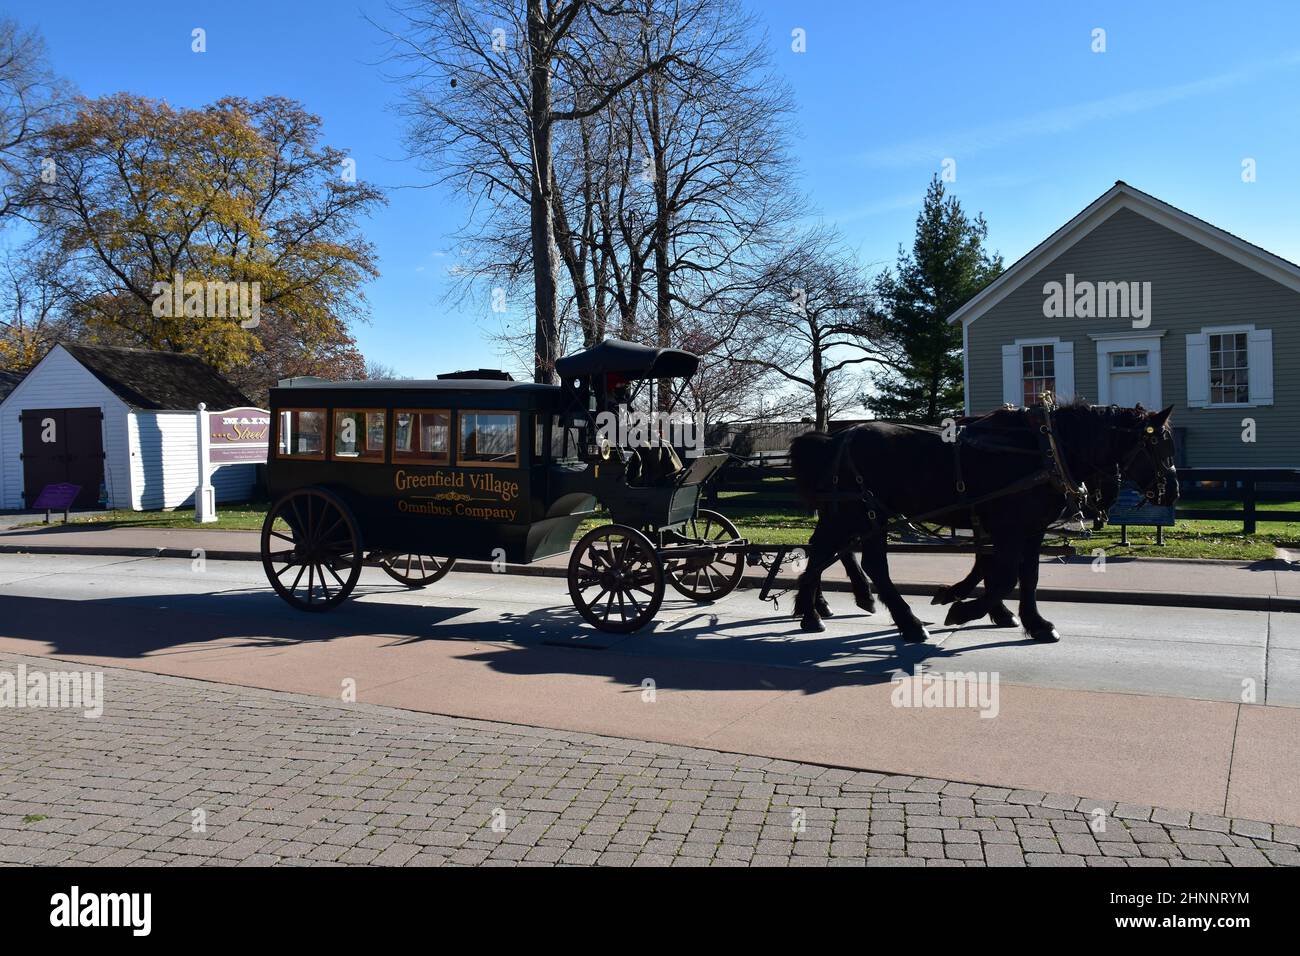 A horse and carriage at Greenfield Village, an 80-acre open air site & part of the Henry Ford museum complex in Dearborn, Detroit, Michigan, USA. Stock Photo